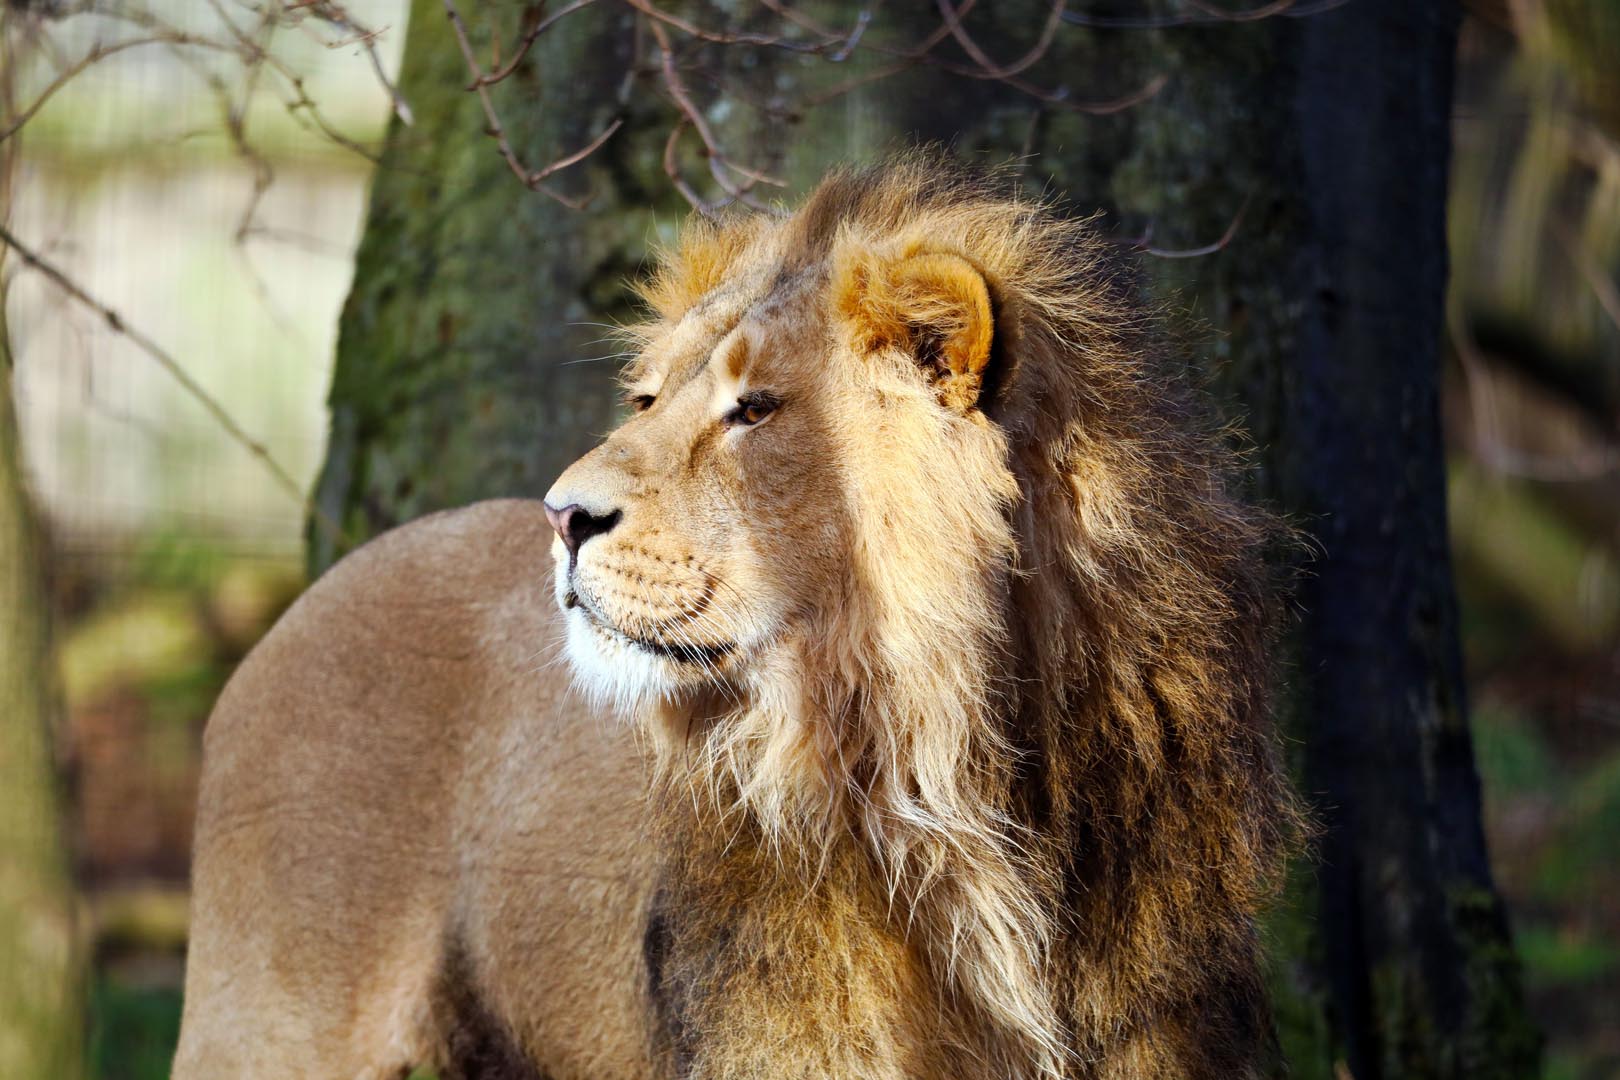 Asiatic lion Jayendra looking to the side in the sun. IMAGE: Amy Middleton (2022)